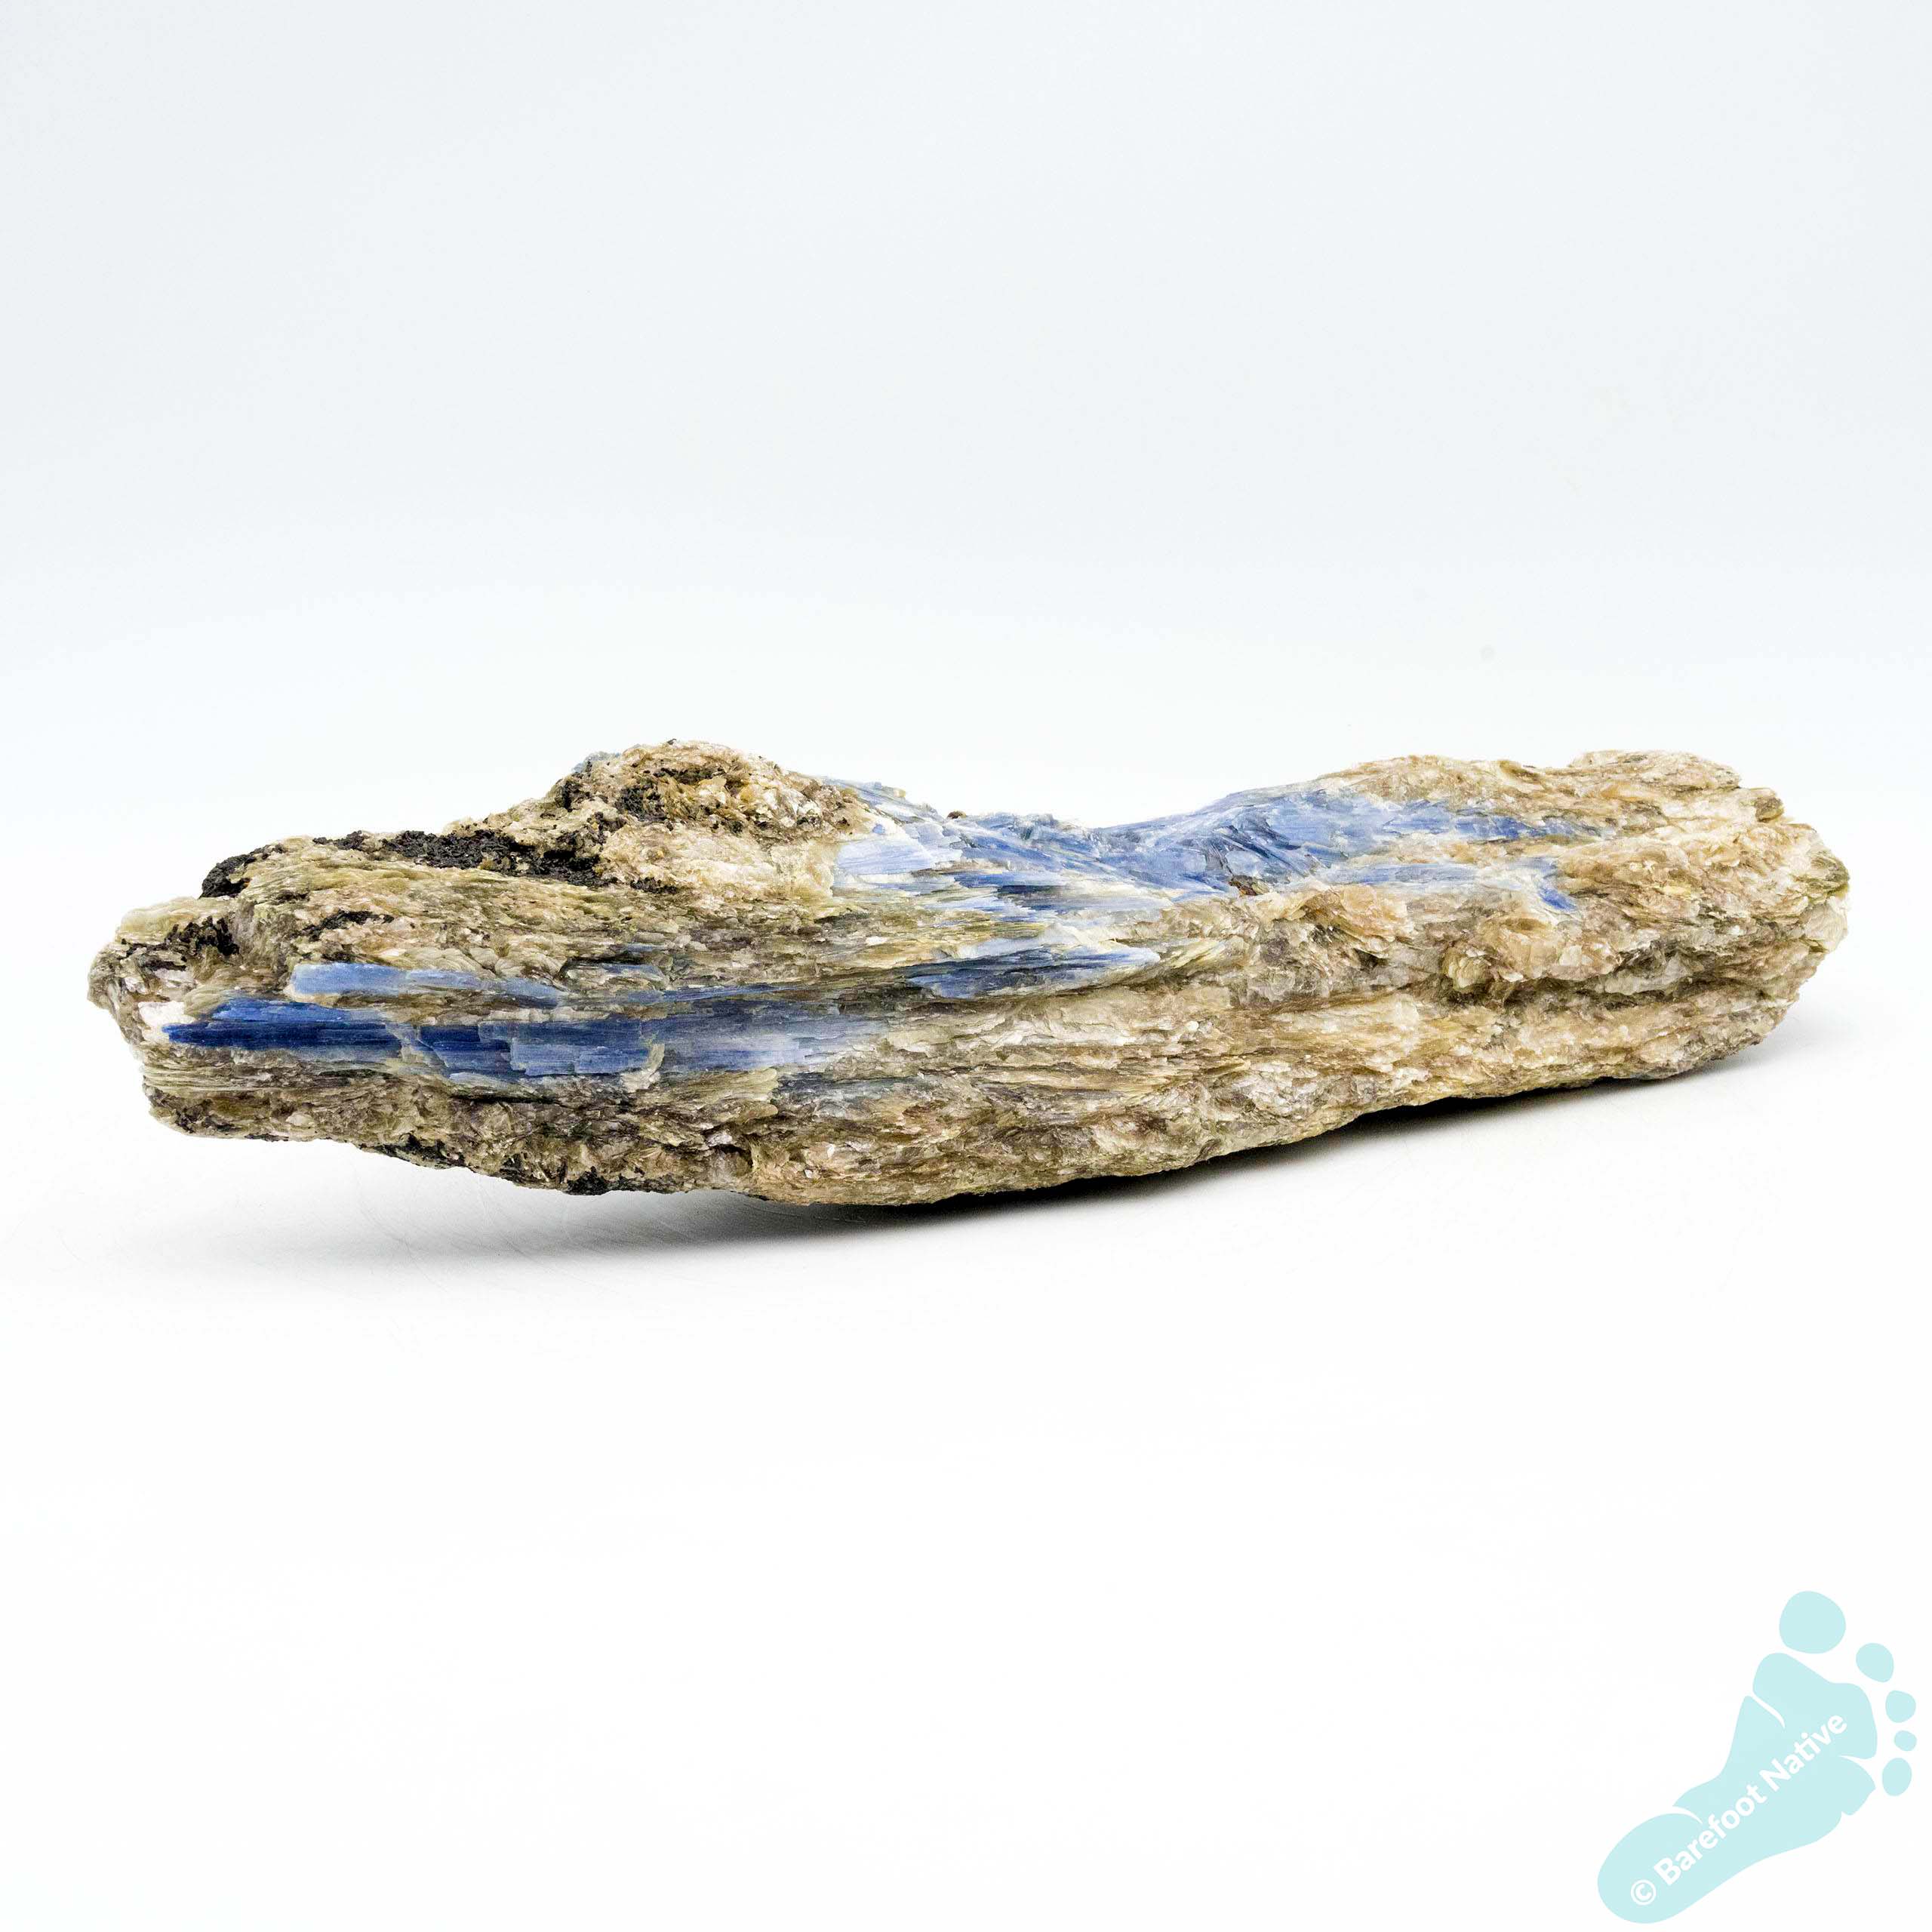 Blue Kyanite with Biotite and Muscovite Mica Crystals Cluster